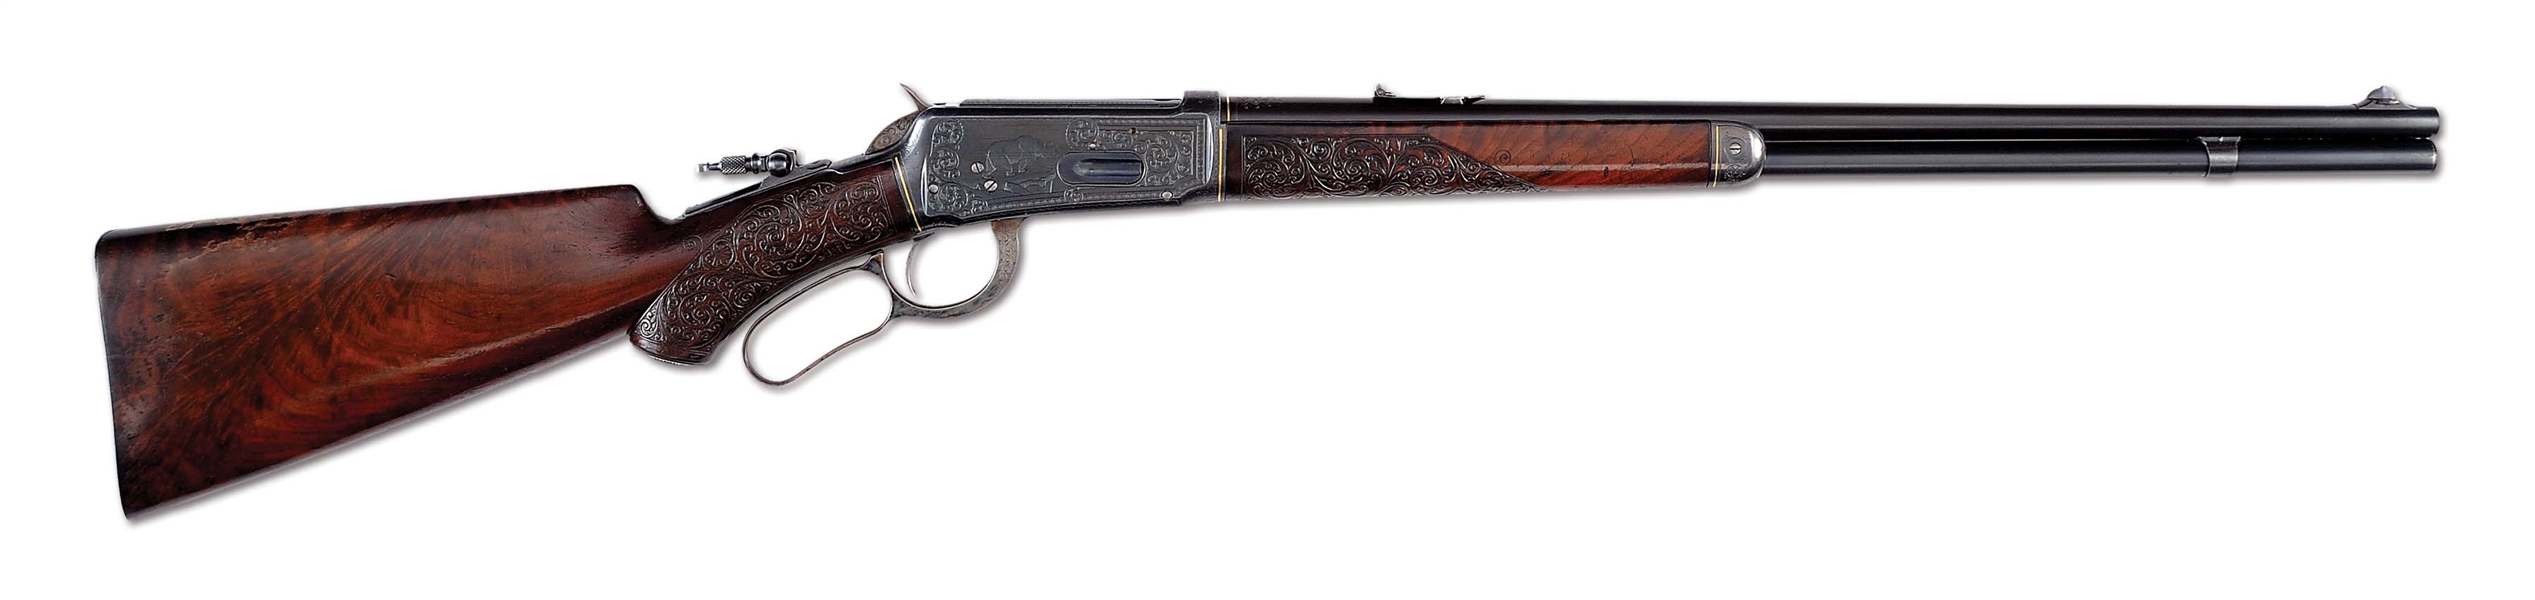 (A) FABULOUS ANTIQUE ENGRAVED WINCHESTER MODEL 1894 RIFLE (1898).